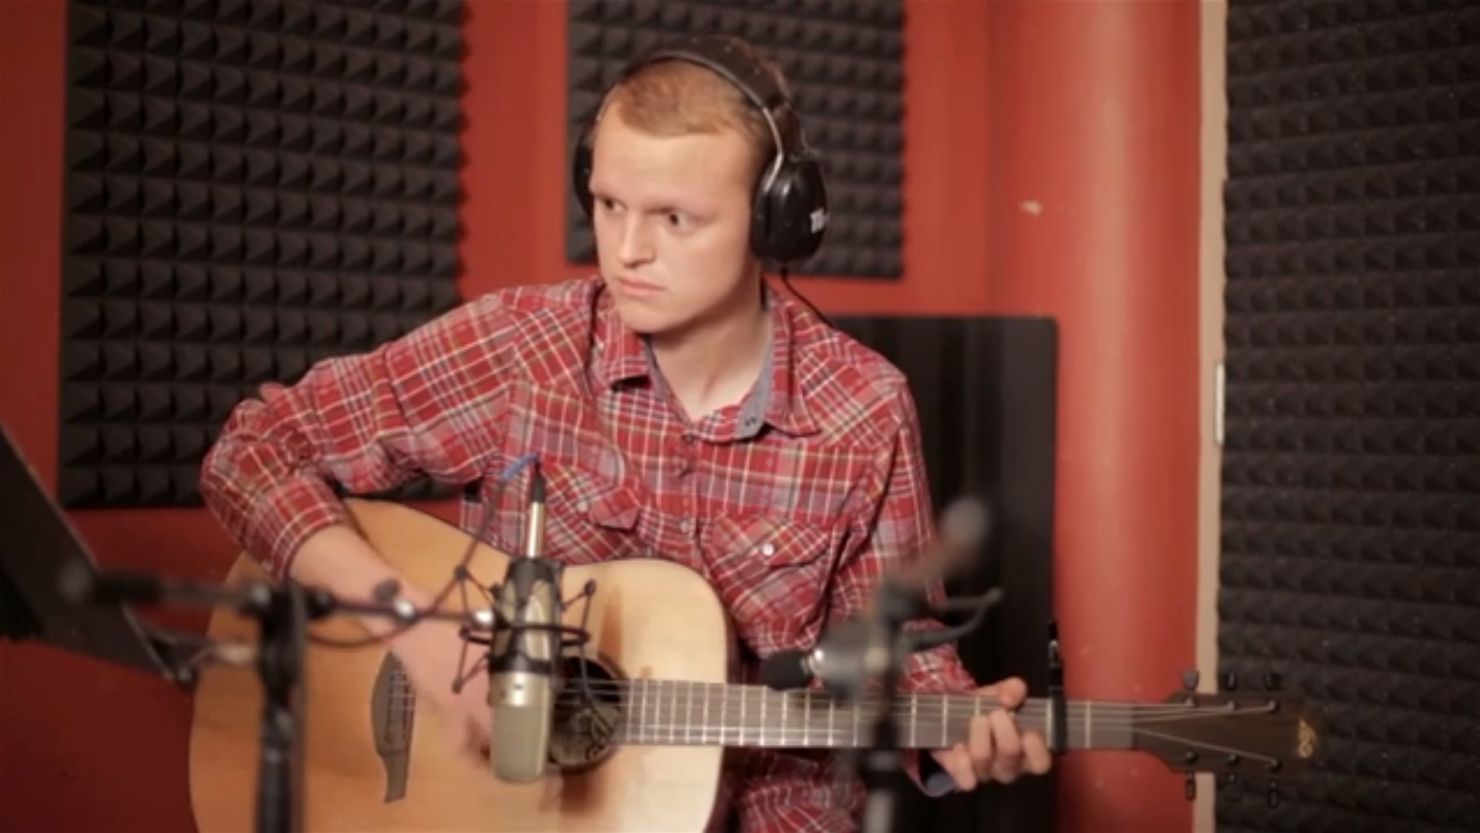 The YouTube video of Zach Sobiech's first song, "Clouds," went viral.